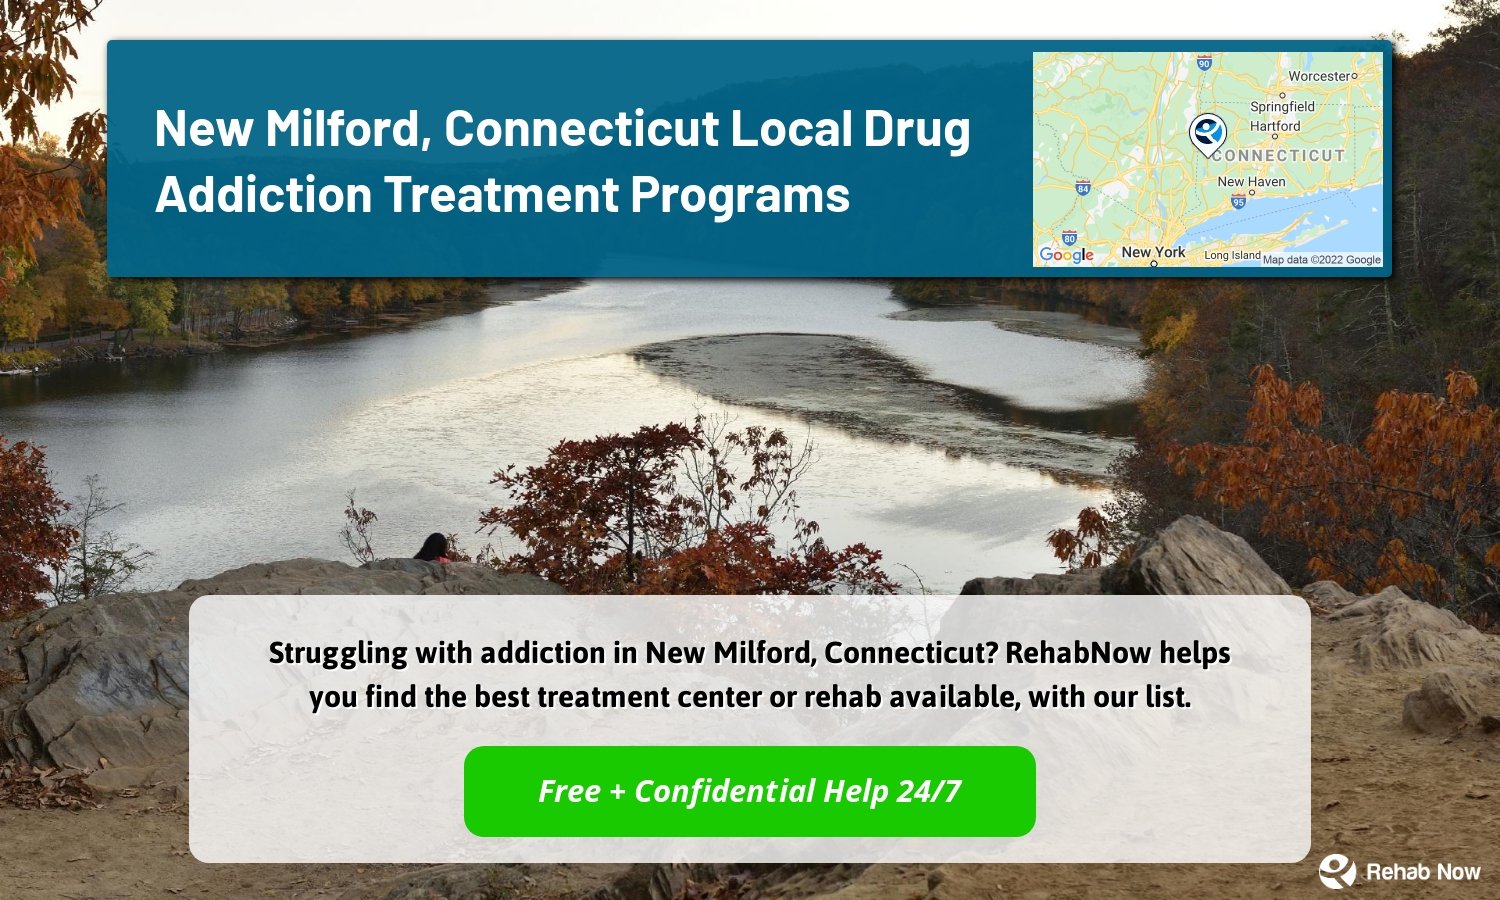 Struggling with addiction in New Milford, Connecticut? RehabNow helps you find the best treatment center or rehab available, with our list.